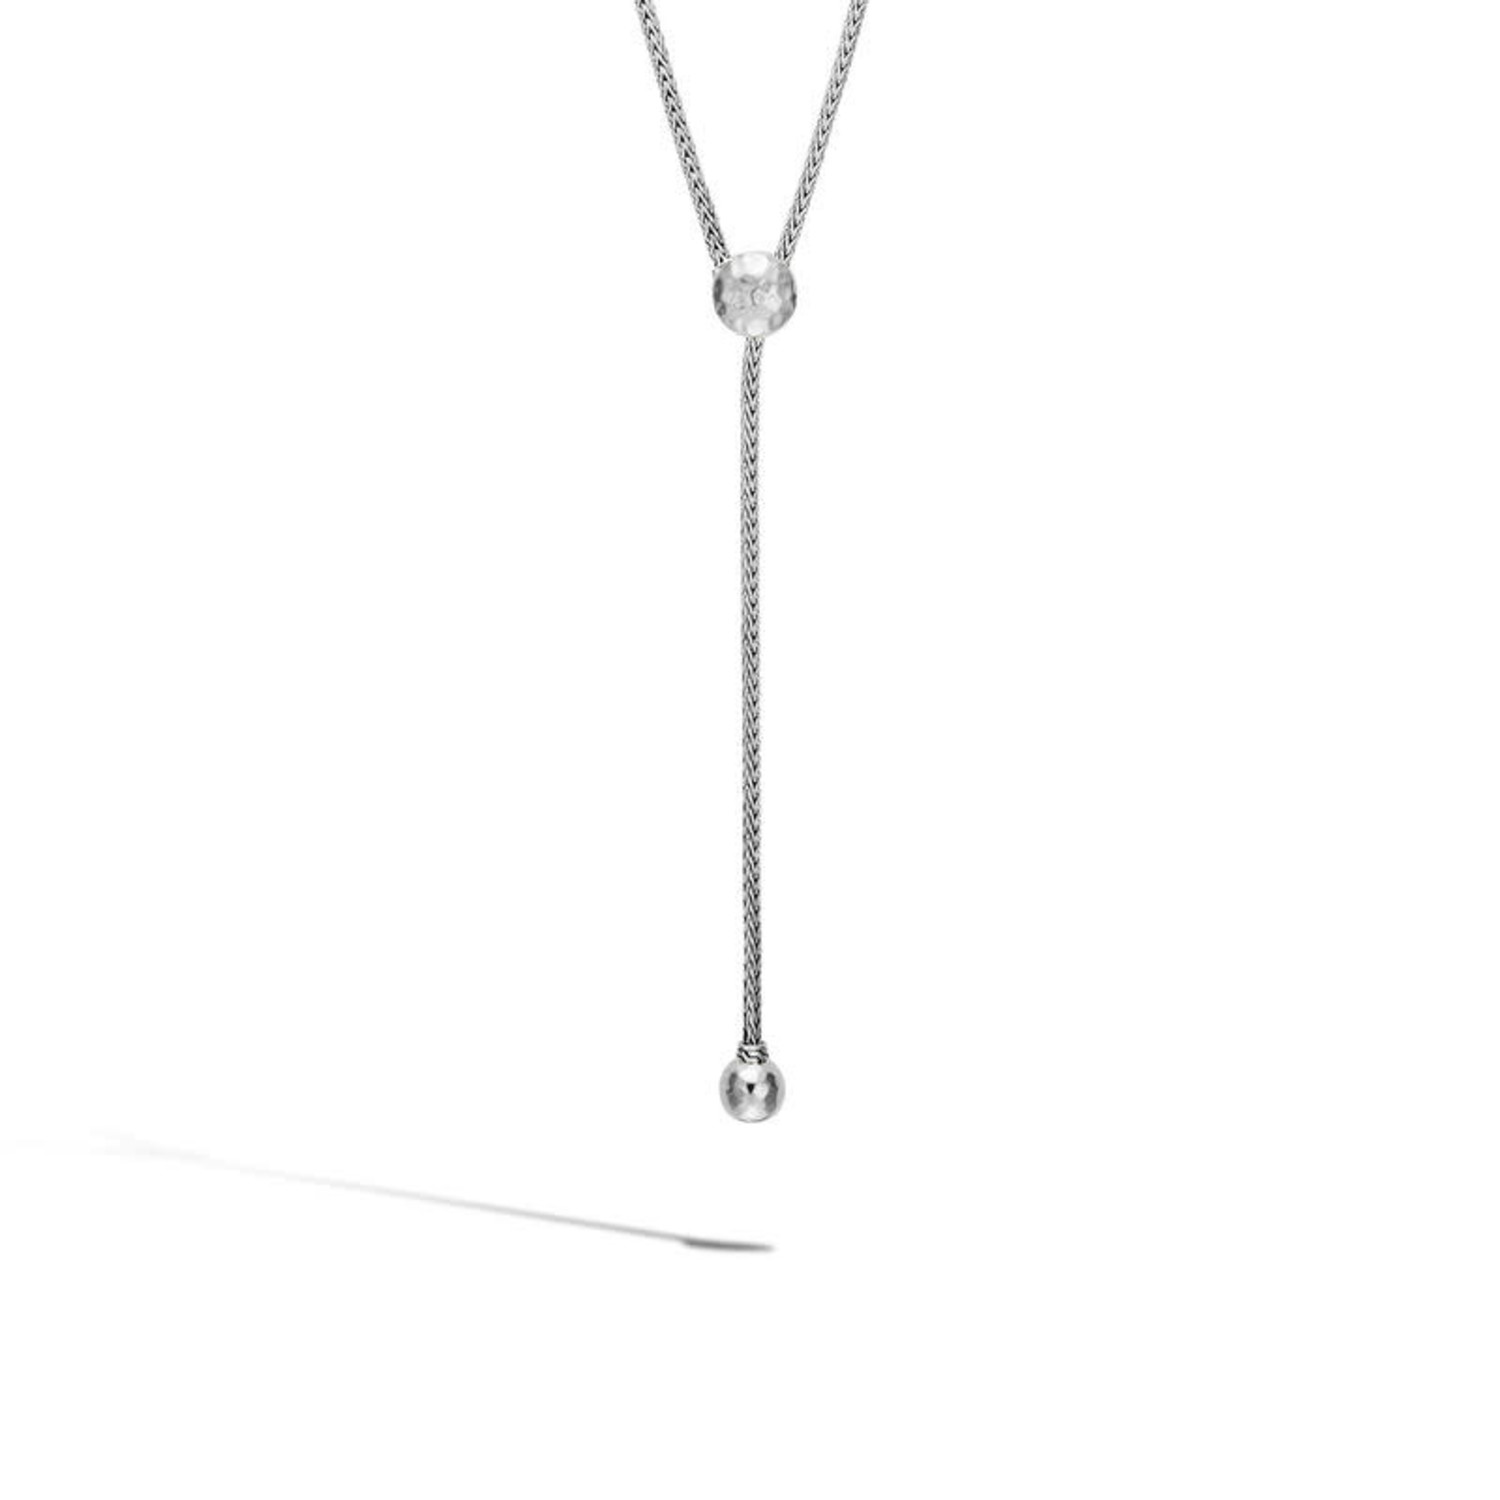 White Beaded Necklace | Accessories Sale | The White Company UK